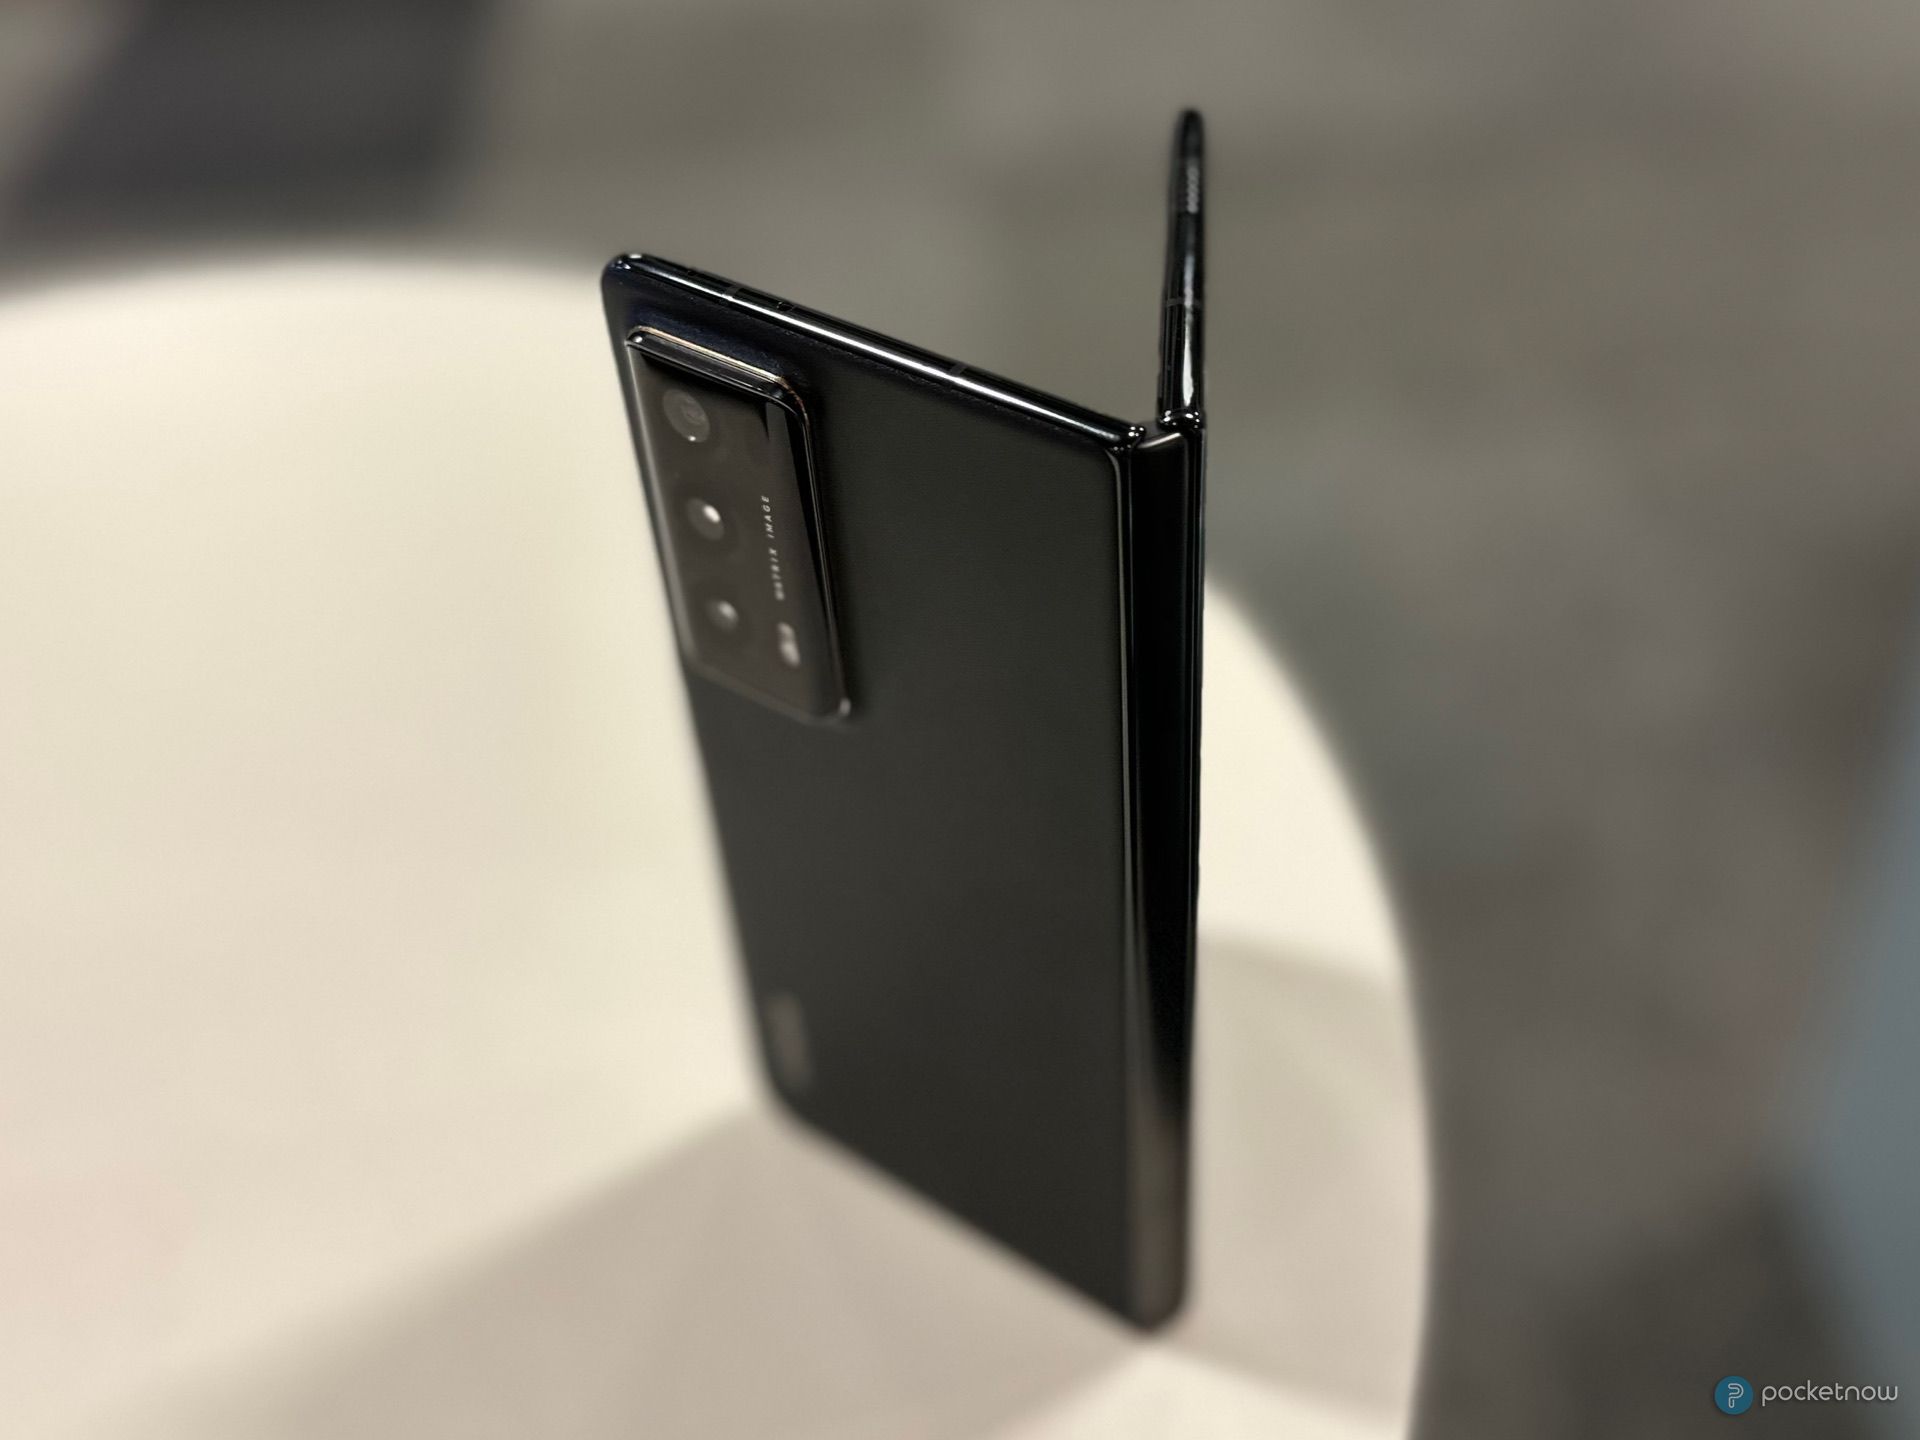 A foldable that’s (almost) as slim as my iPhone